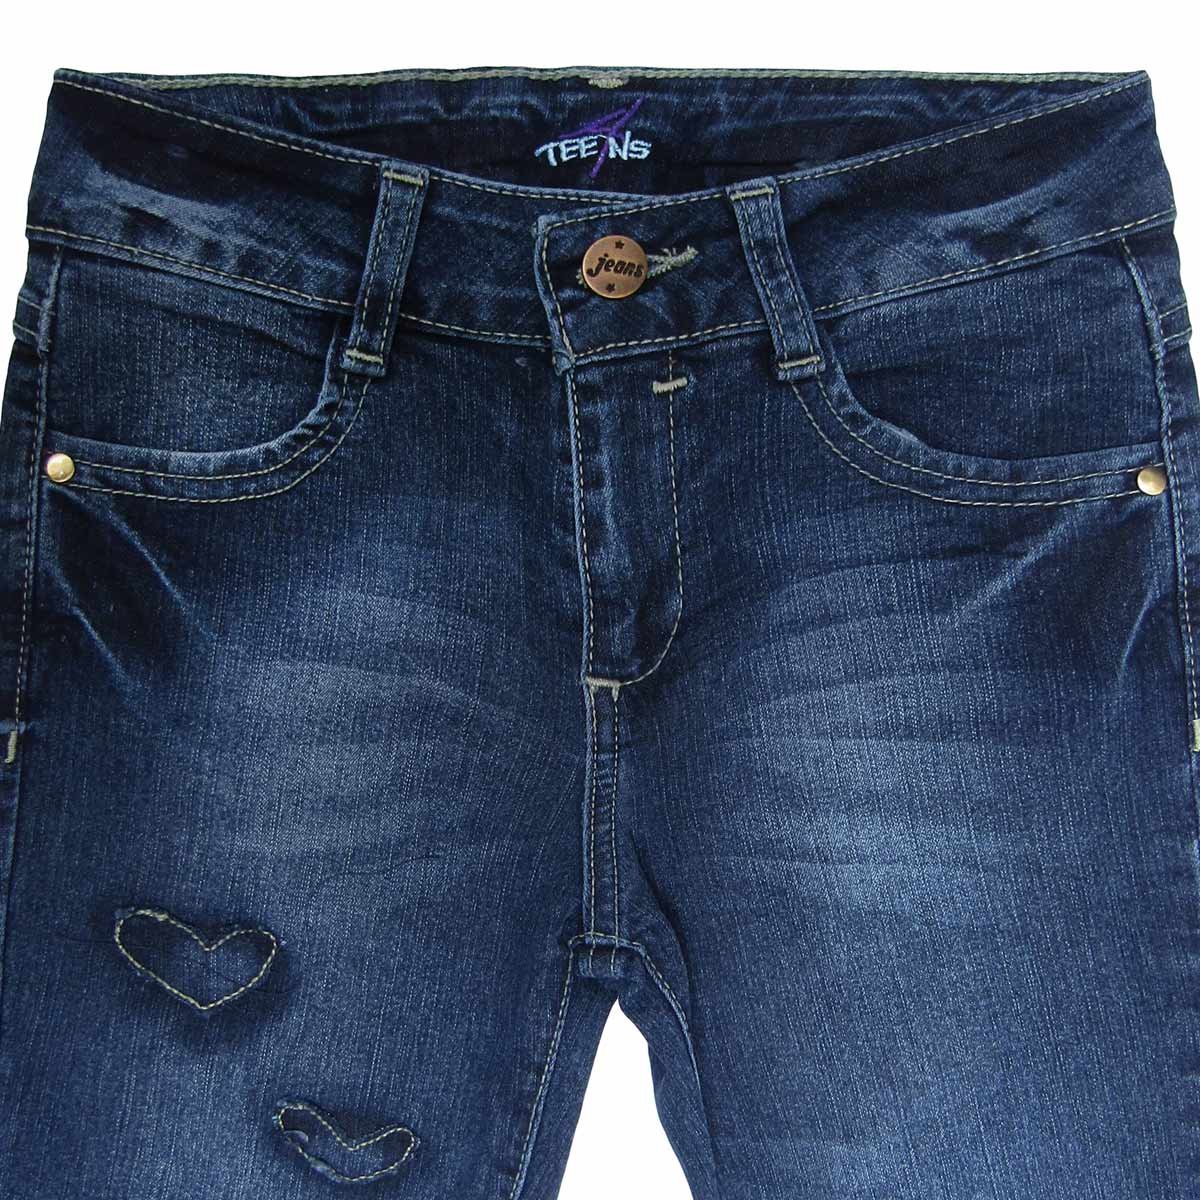 Jeans Skinny con Parches Corazon 4Teen